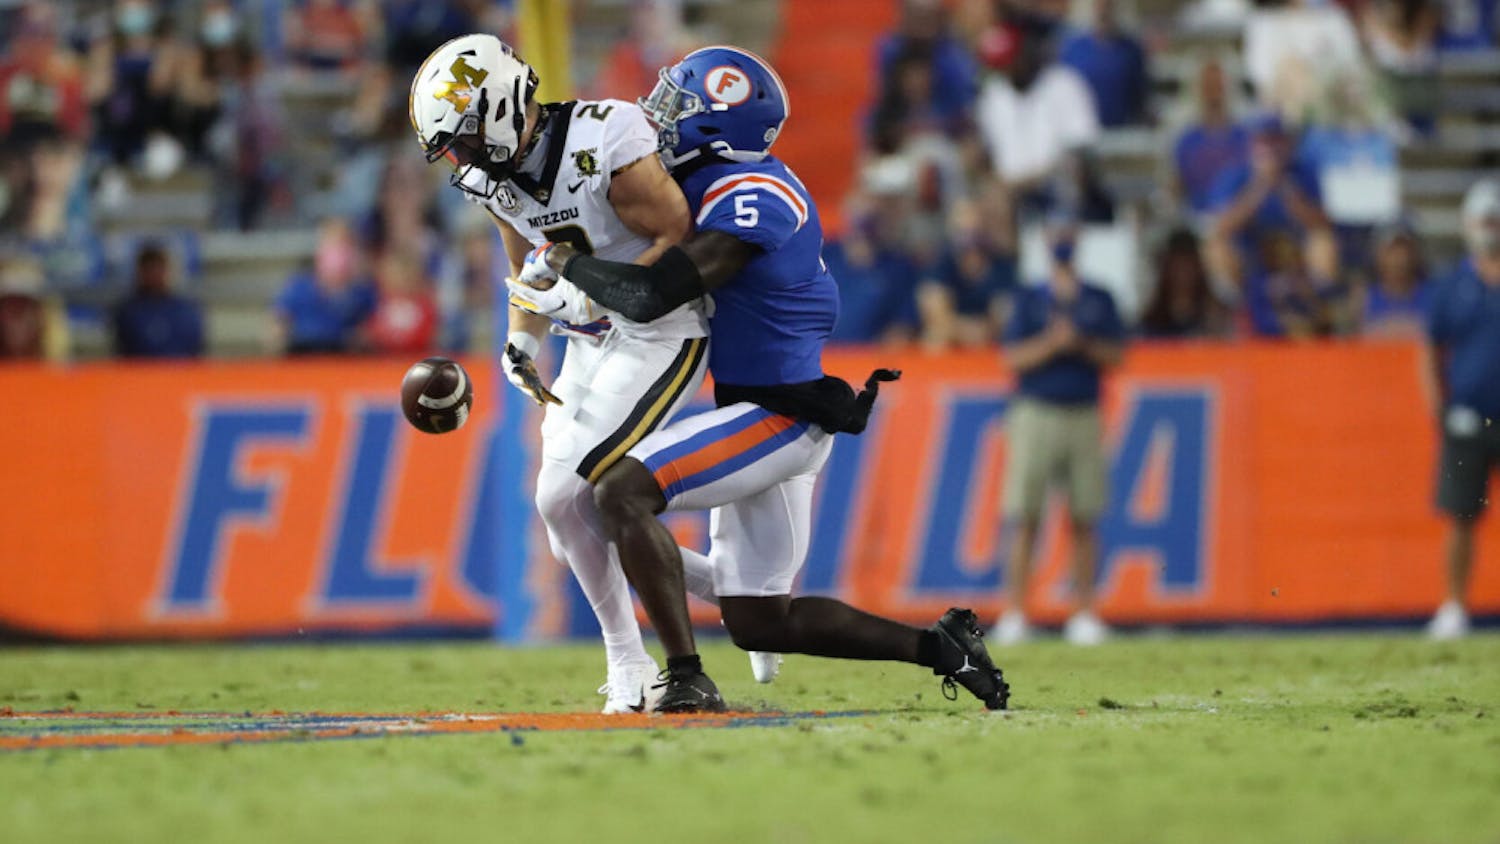 Florida cornerback Kaiir Elam is a presumed star, but the rest of the cornerback group must battle inexperience during the 2021 season. (Photo courtesy of Courtney Culbreath/UAA)